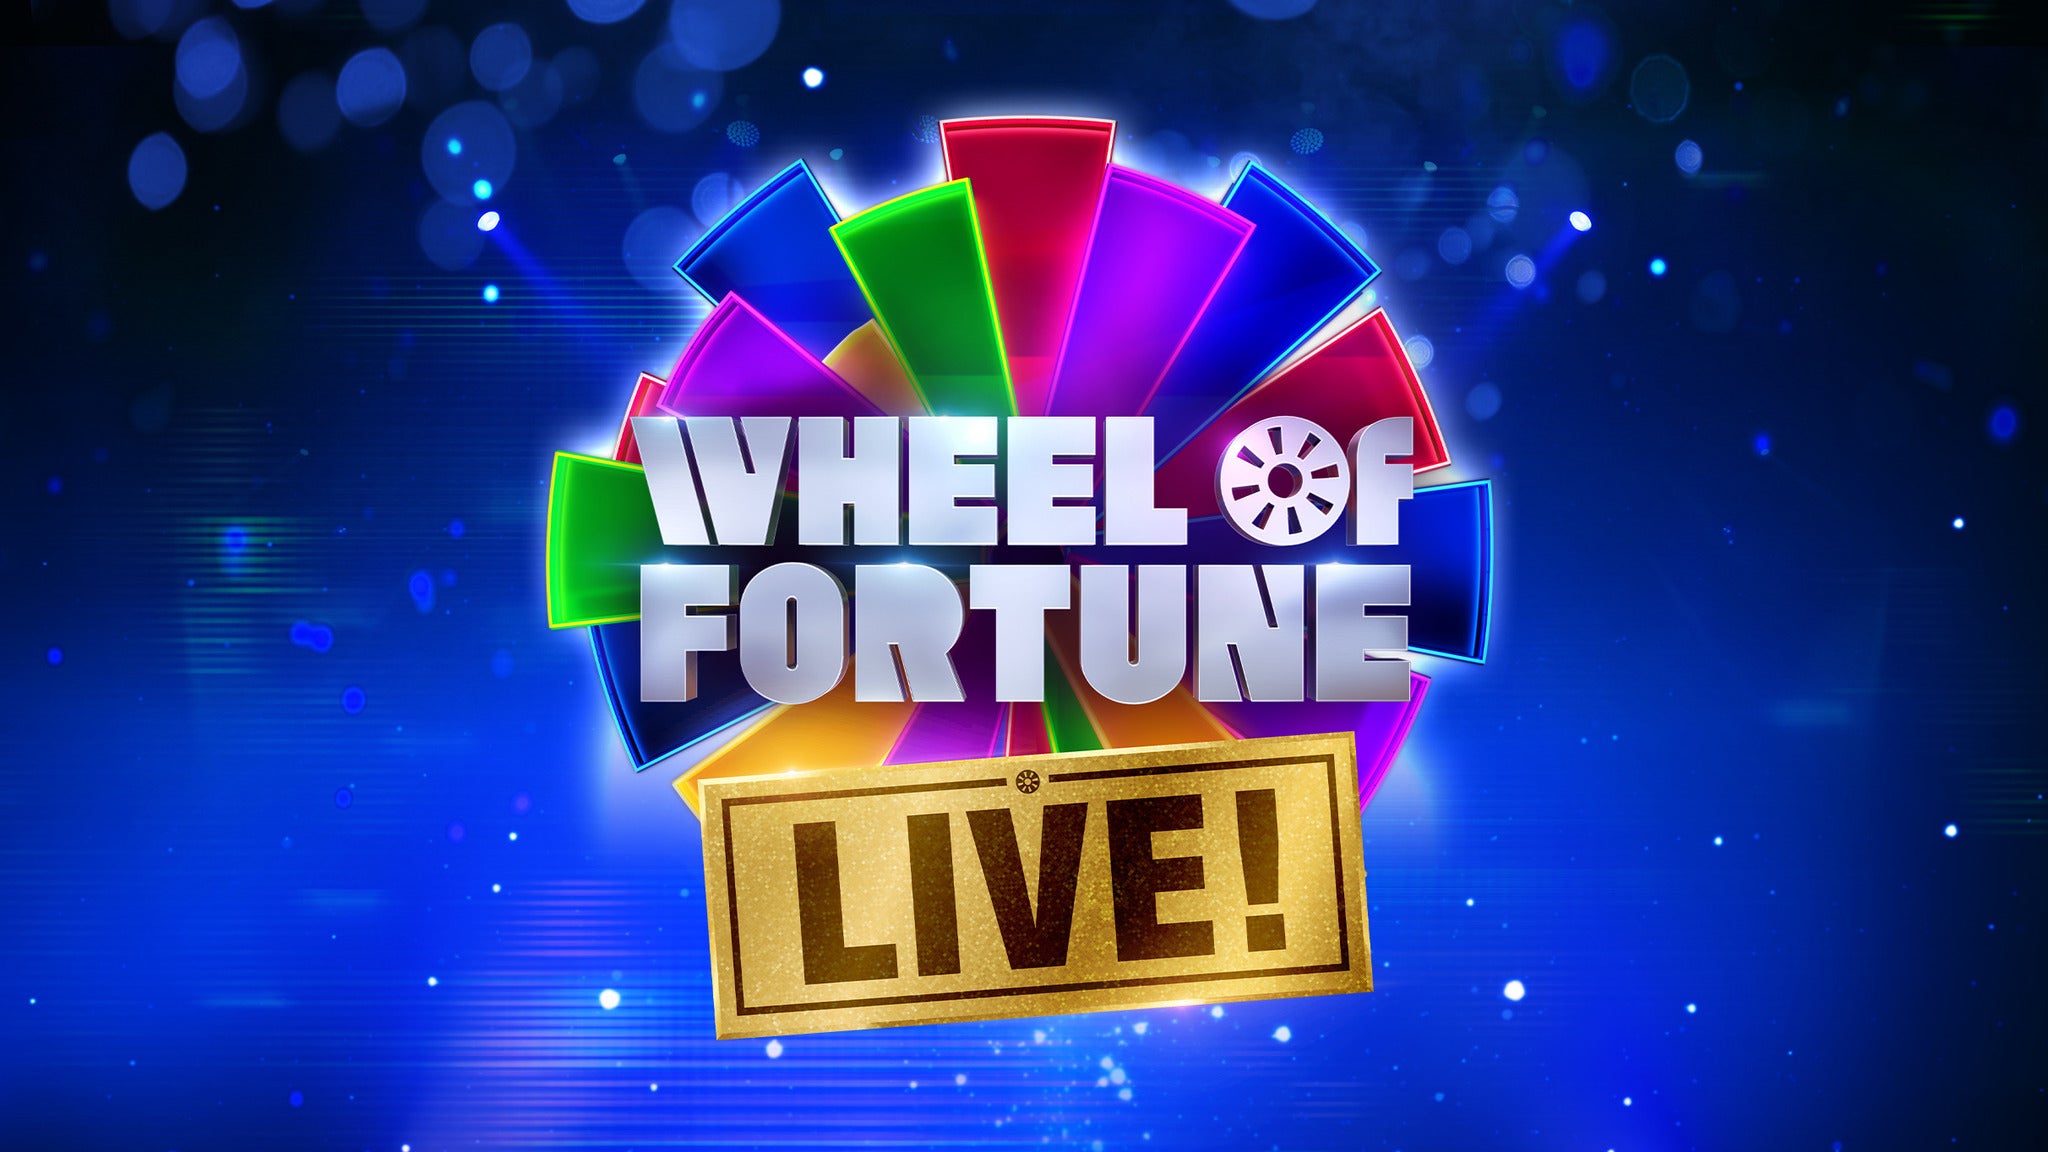 Wheel of Fortune Live! at Pikes Peak Center